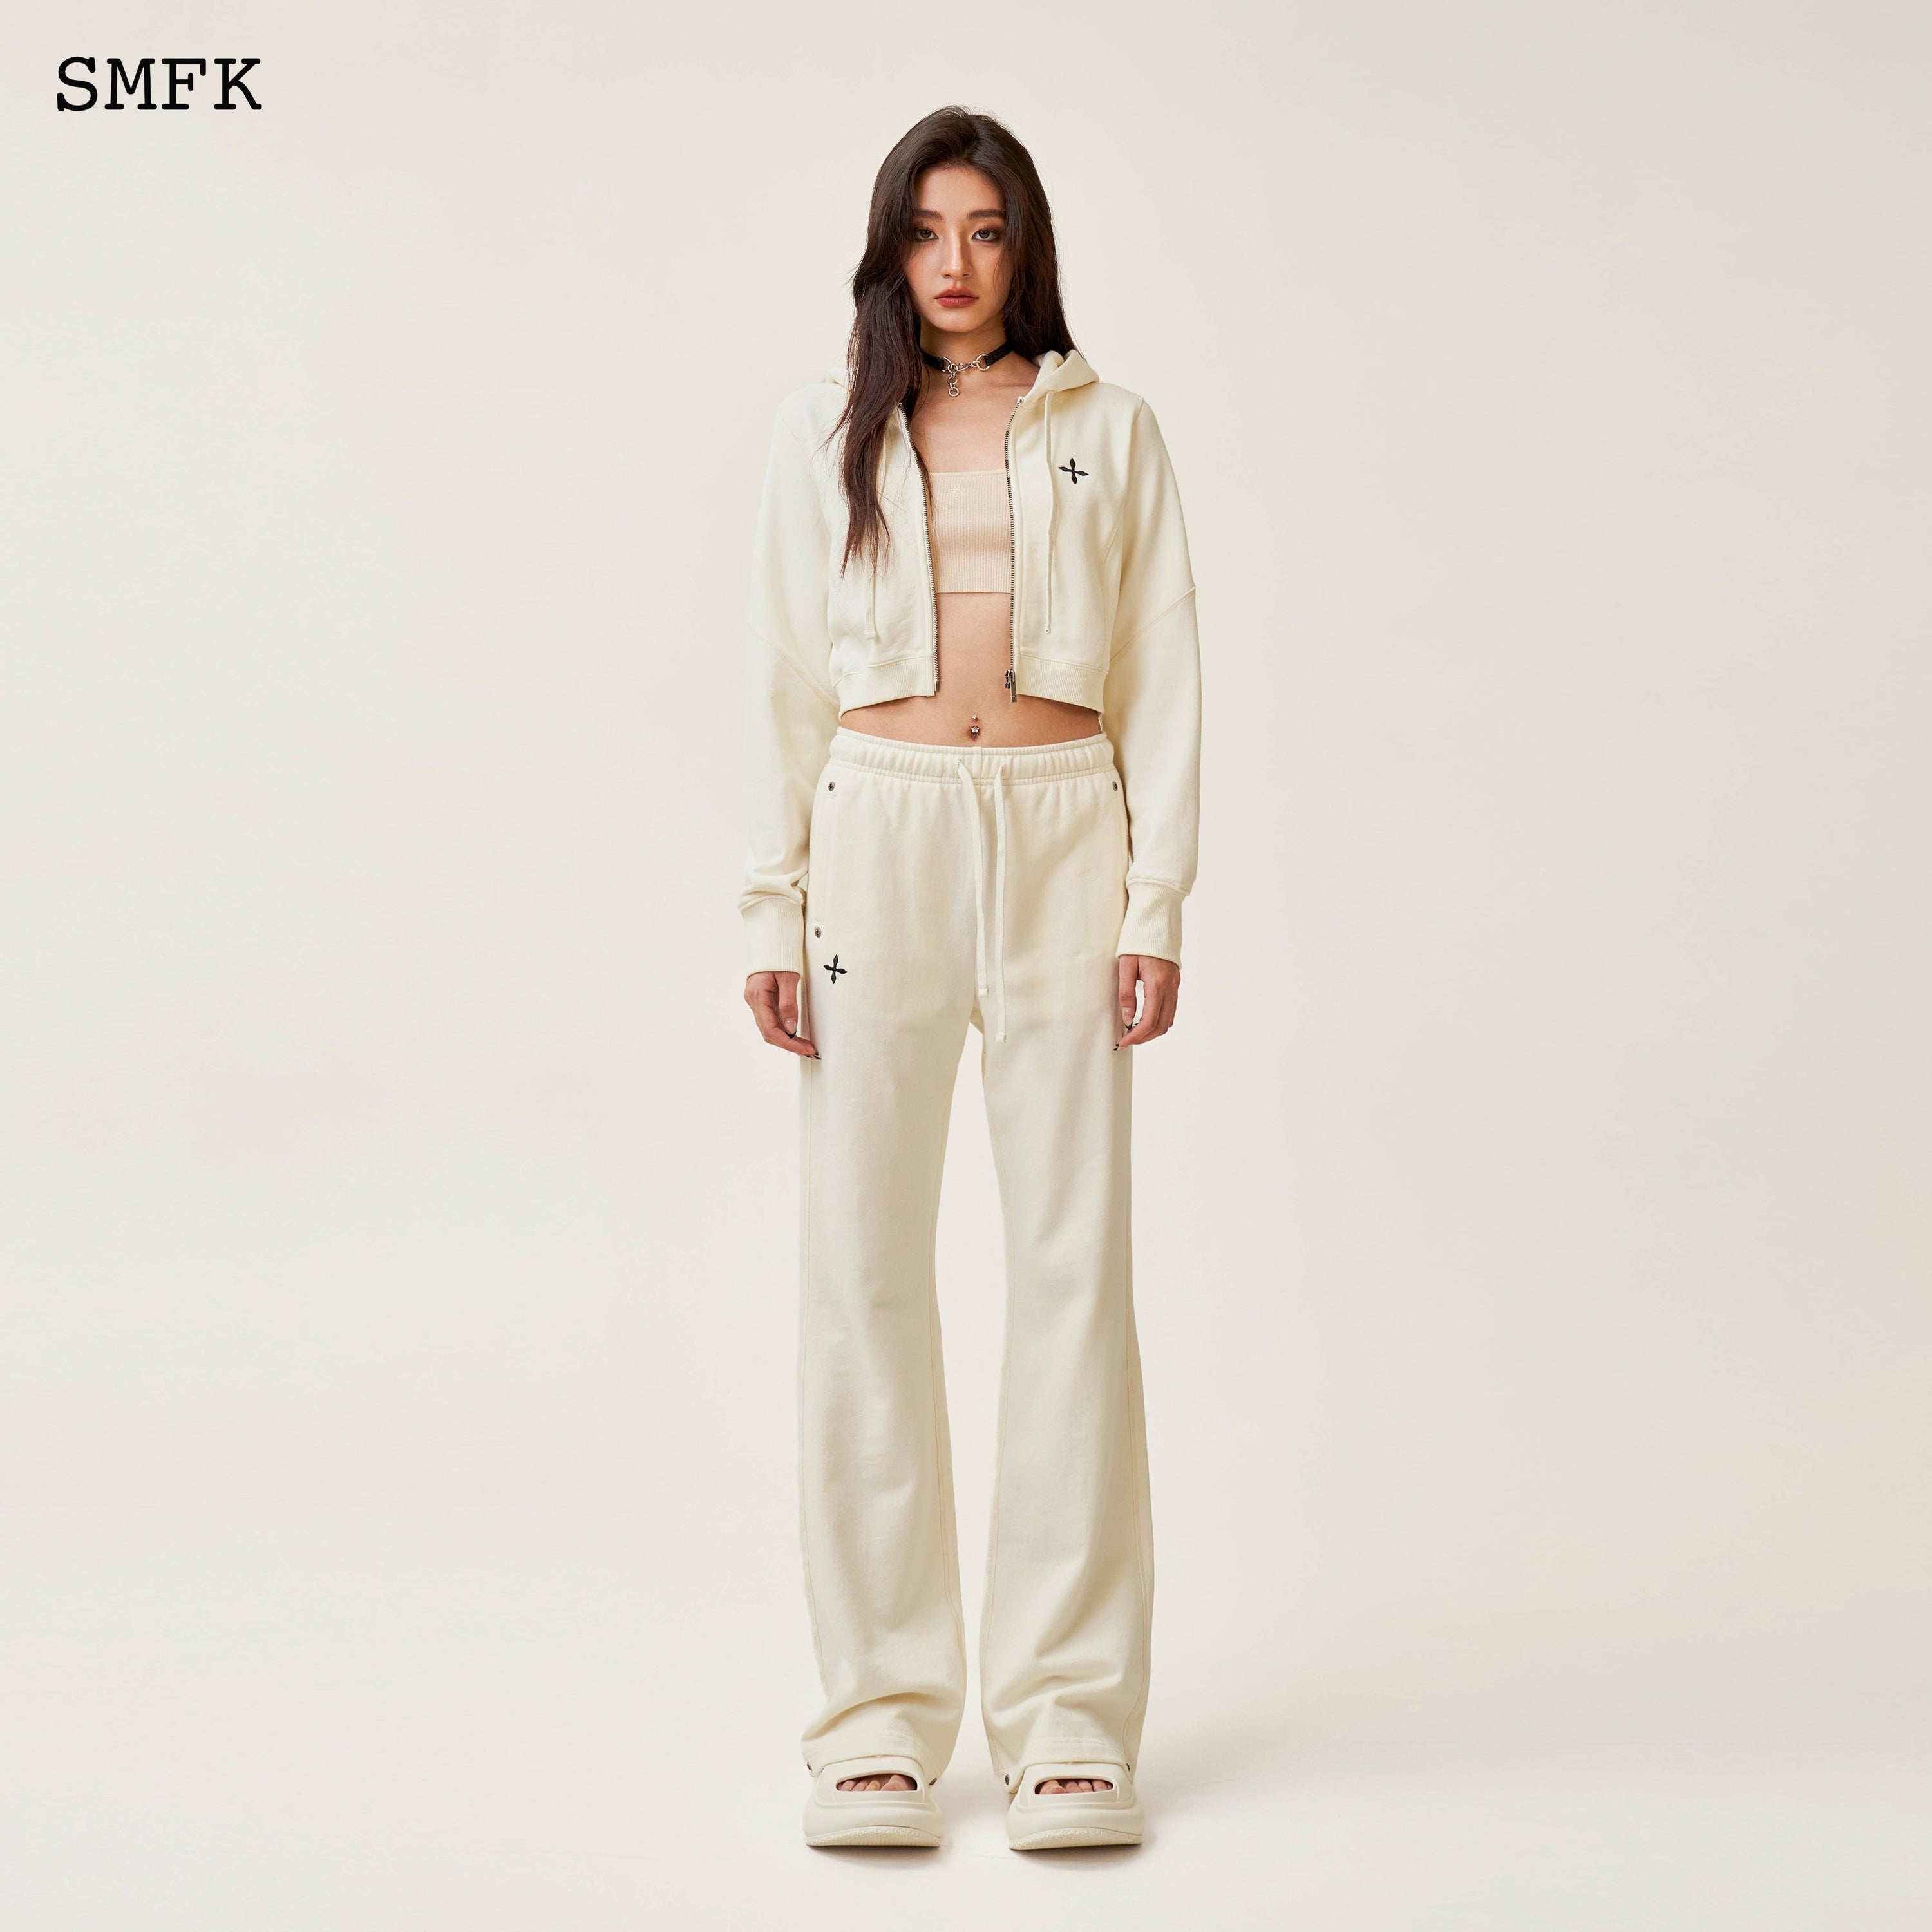 Compass Cross Classic Flared Sweatpants White - SMFK Official